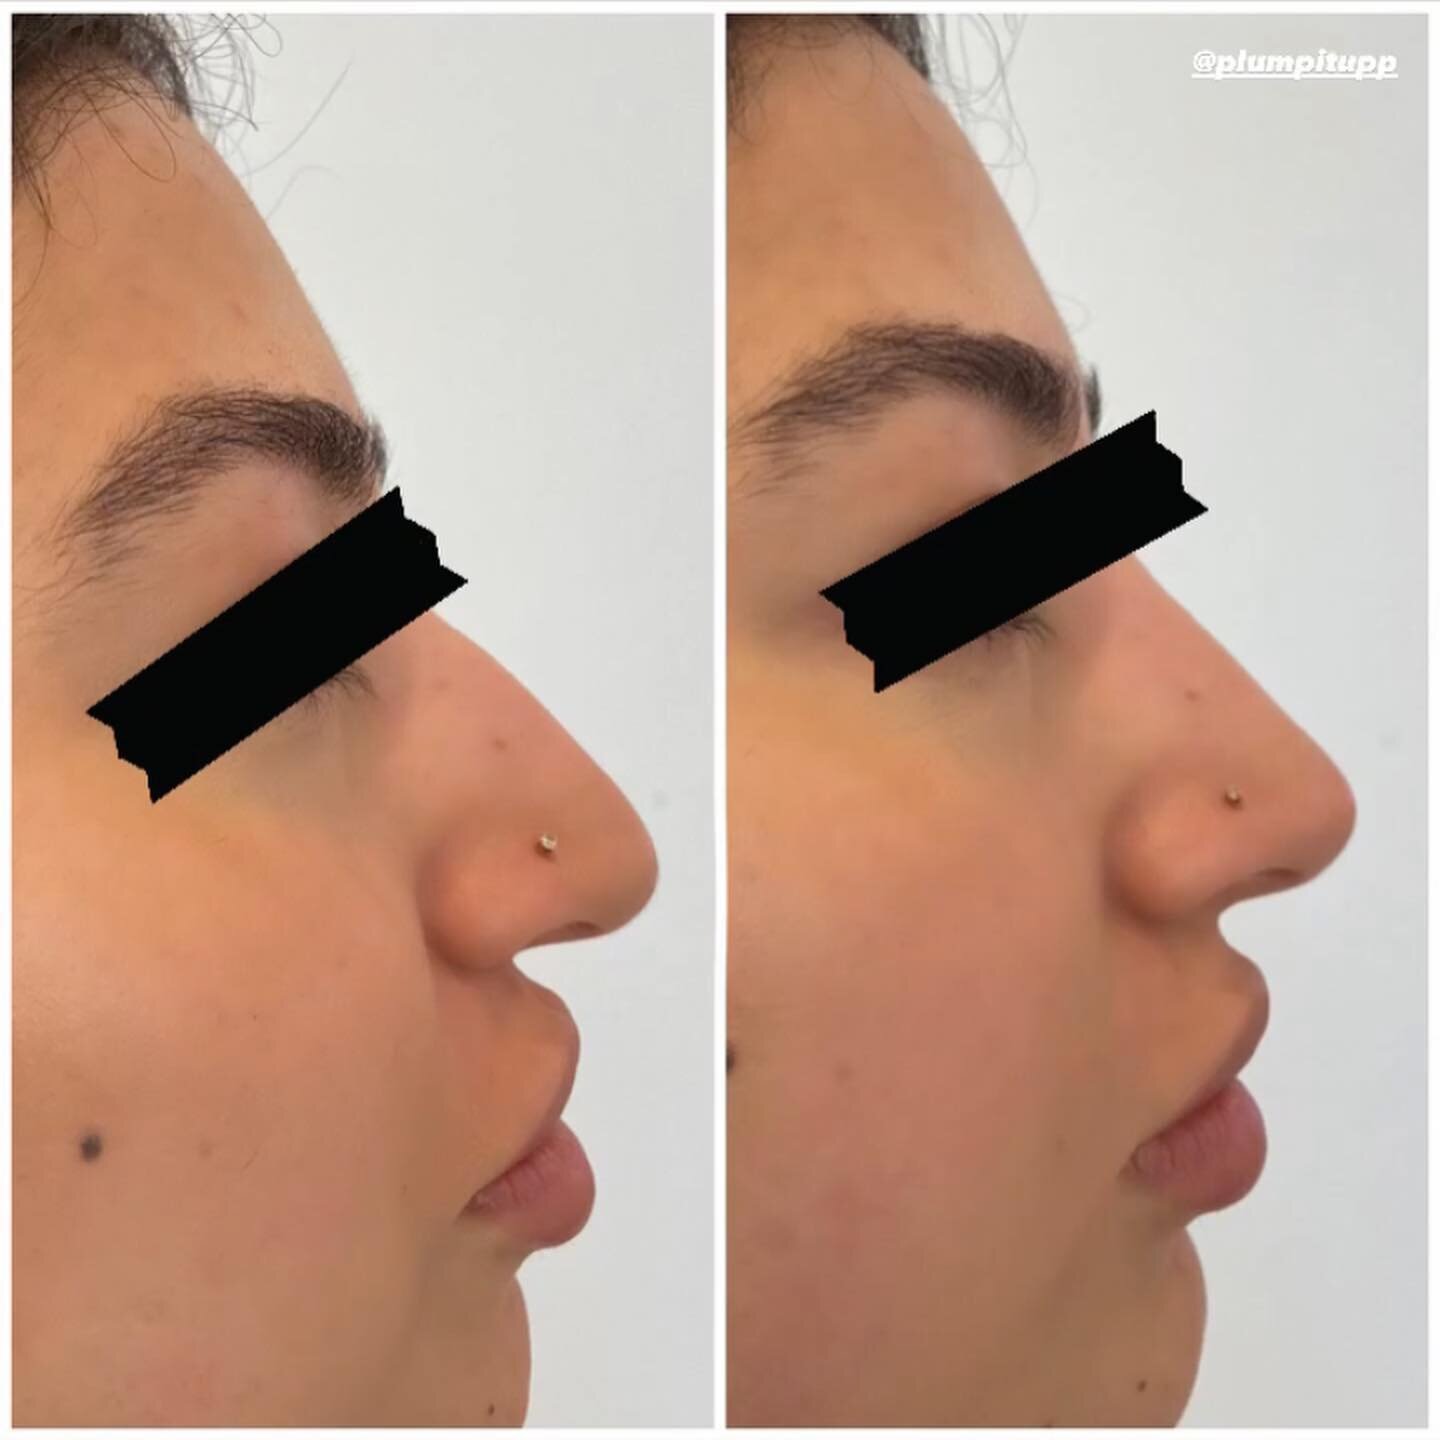 Non surgical rhinoplasty aka Nose Filler !! I am so excited to offer this treatment to my clients. This is something I have been training for for years and to finally give this service to you makes me so happy!! There will be restrictions for who can